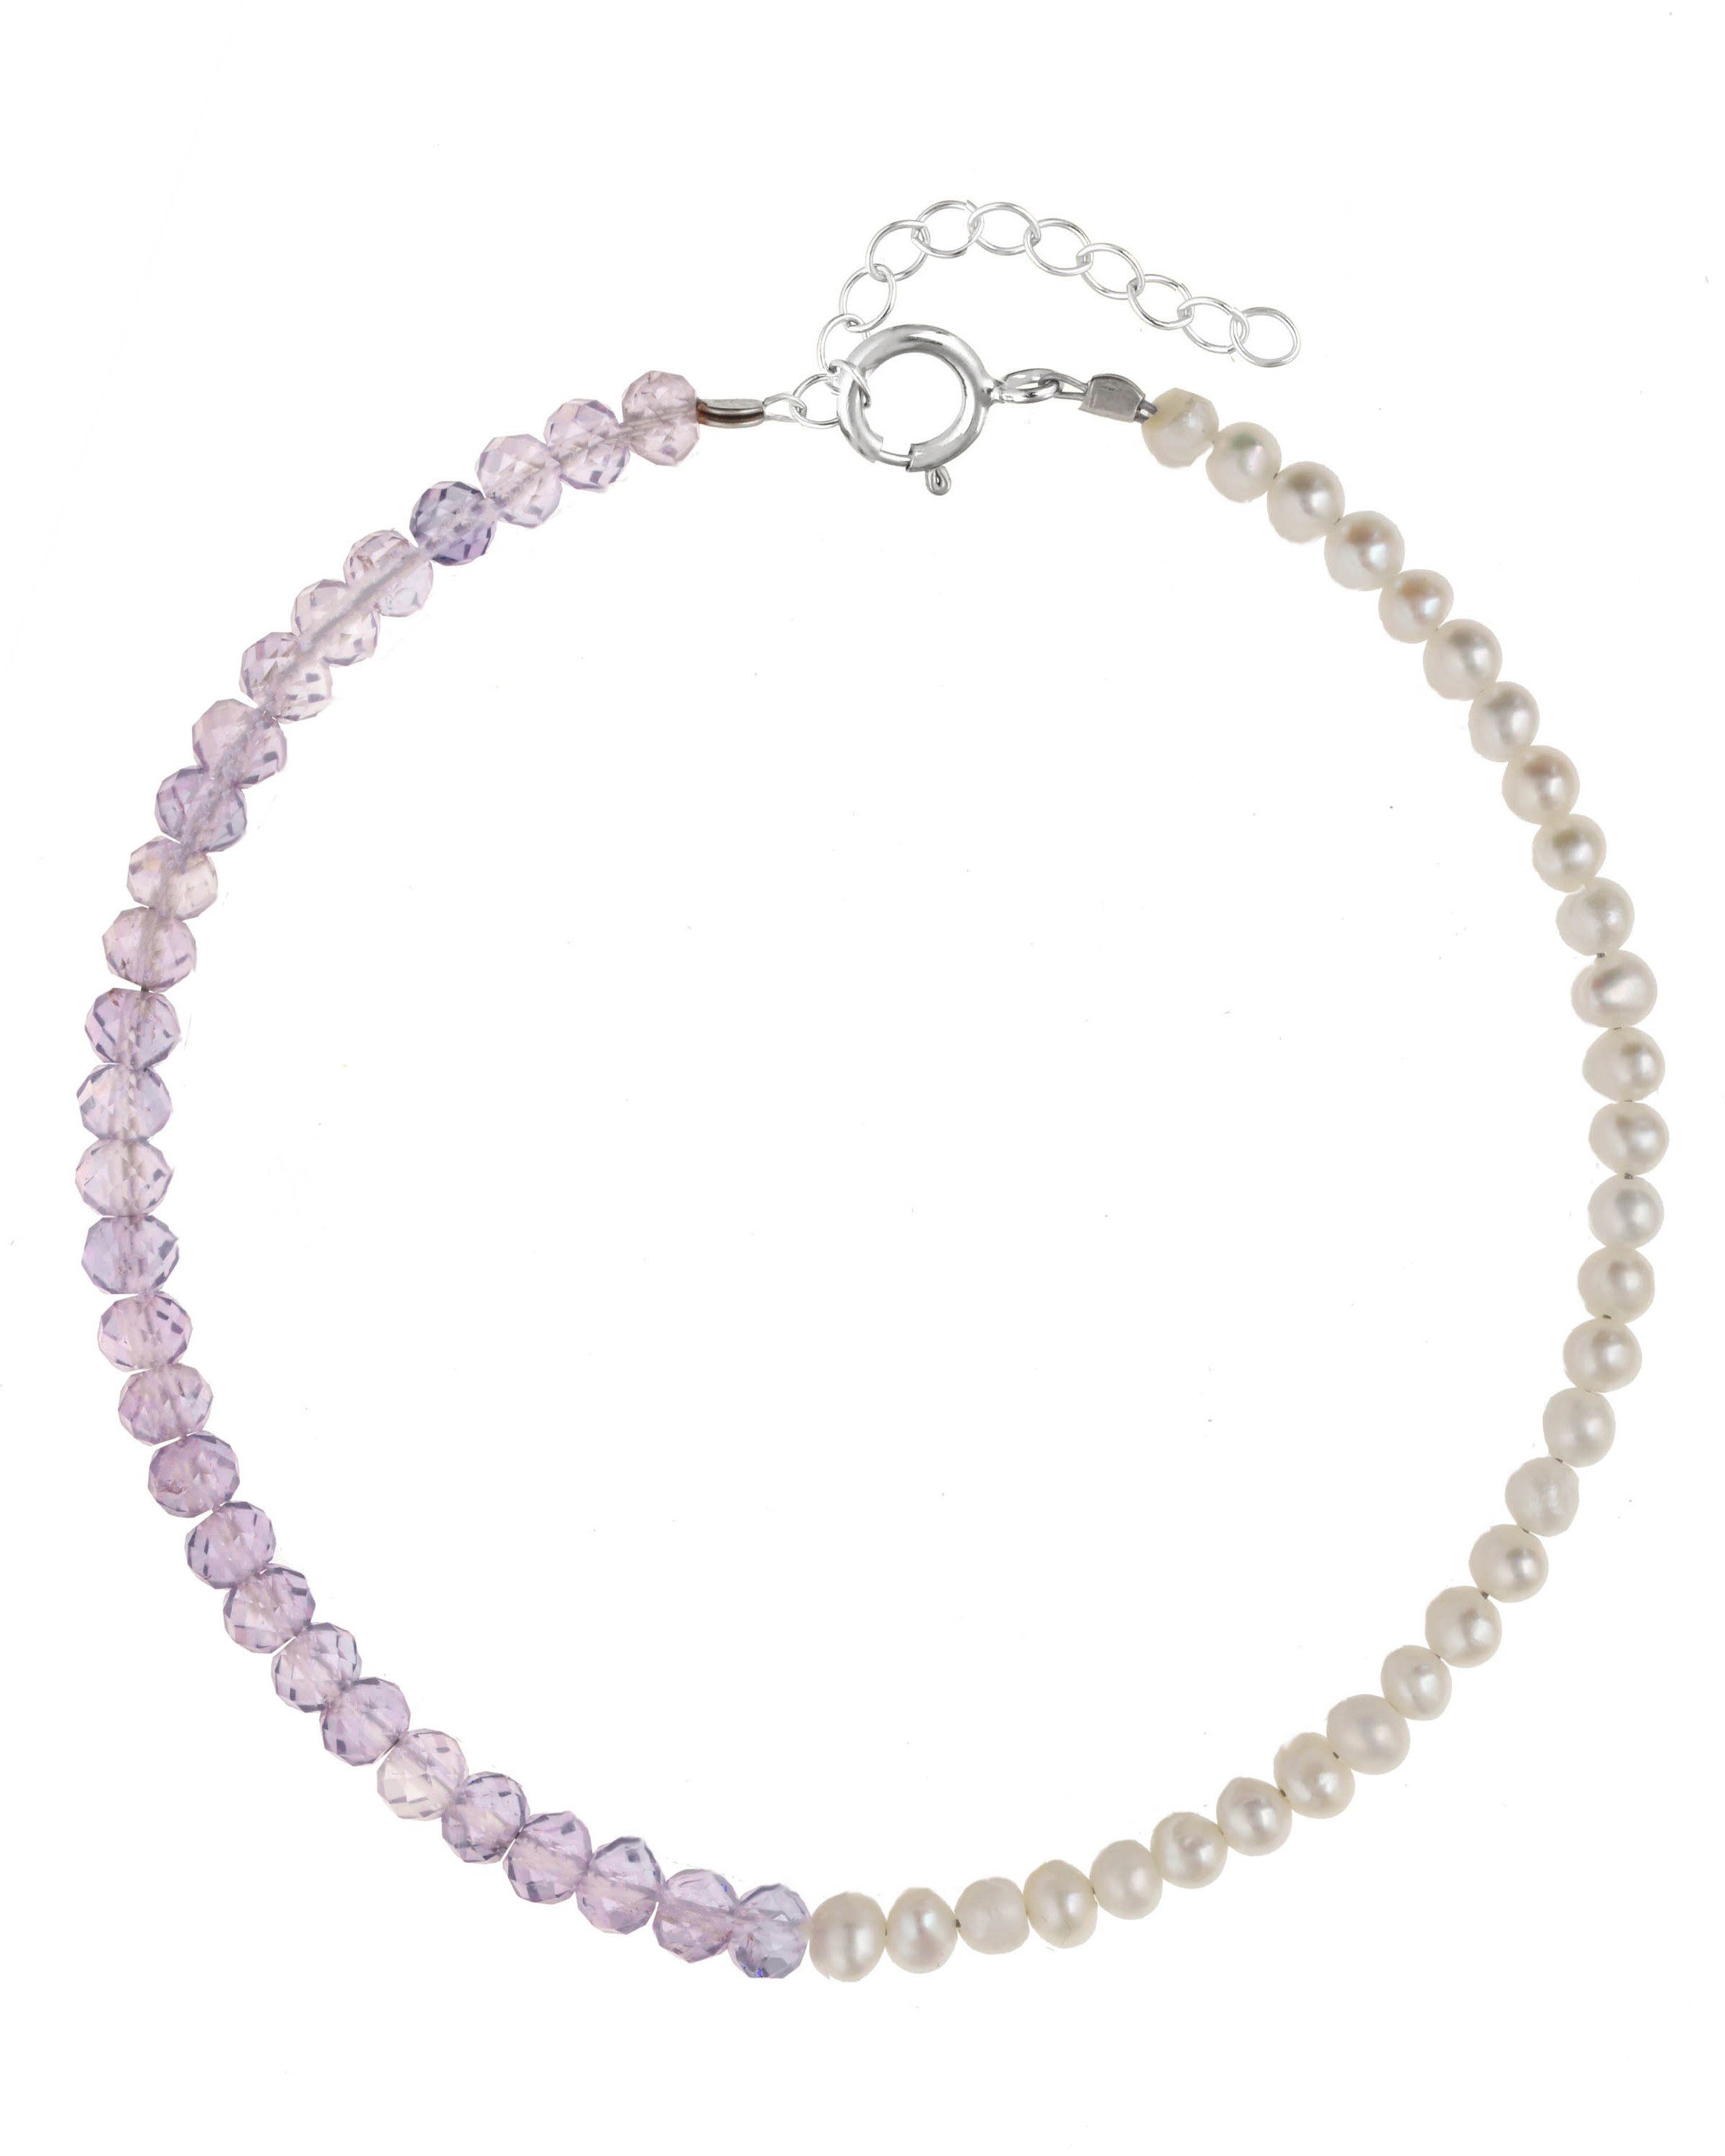 Elo Bracelet by KOZAKH. A 6 to 7 inch adjustable length bracelet, crafted in Sterling Silver. Half of the bracelet strand features 3.5mm Freshwater Pearls and 3.5mm Faceted Amethyst beads on the other half.